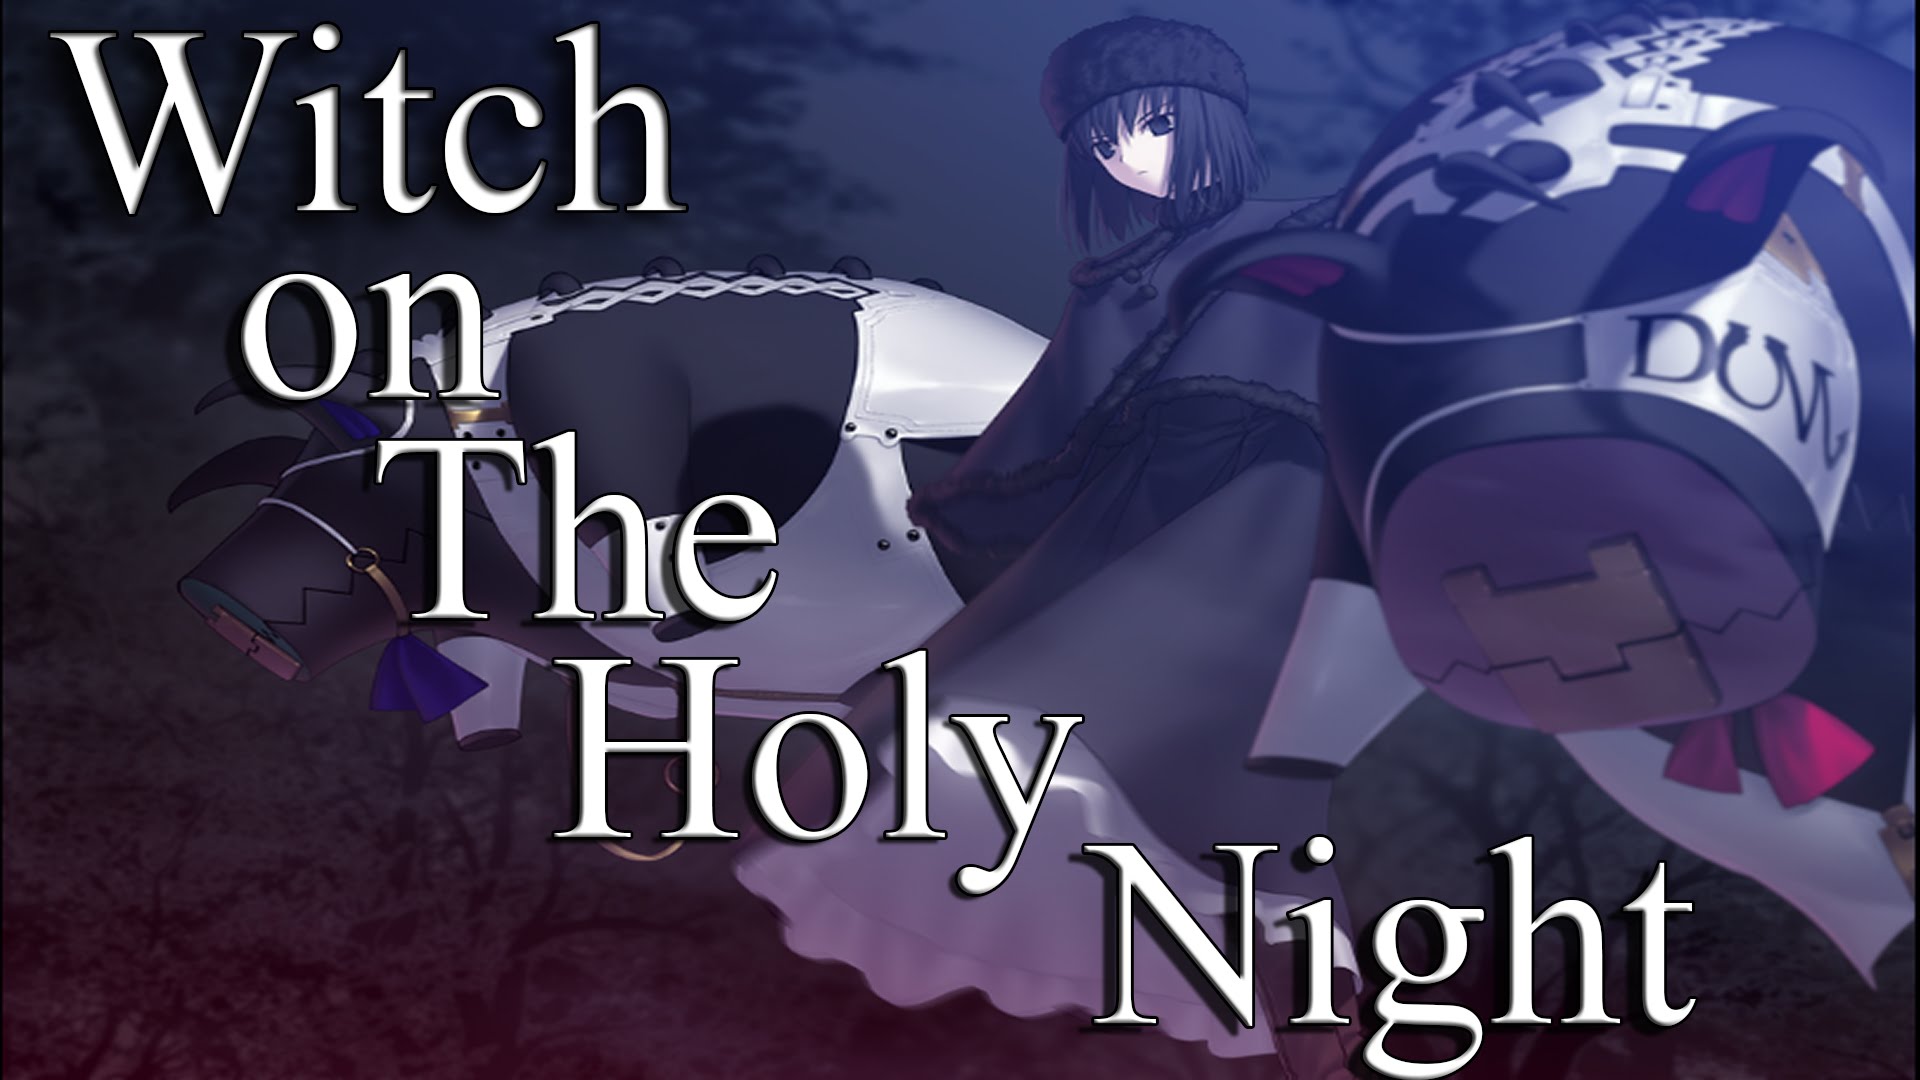 Witch On The Holy Night Backgrounds, Compatible - PC, Mobile, Gadgets| 1920x1080 px